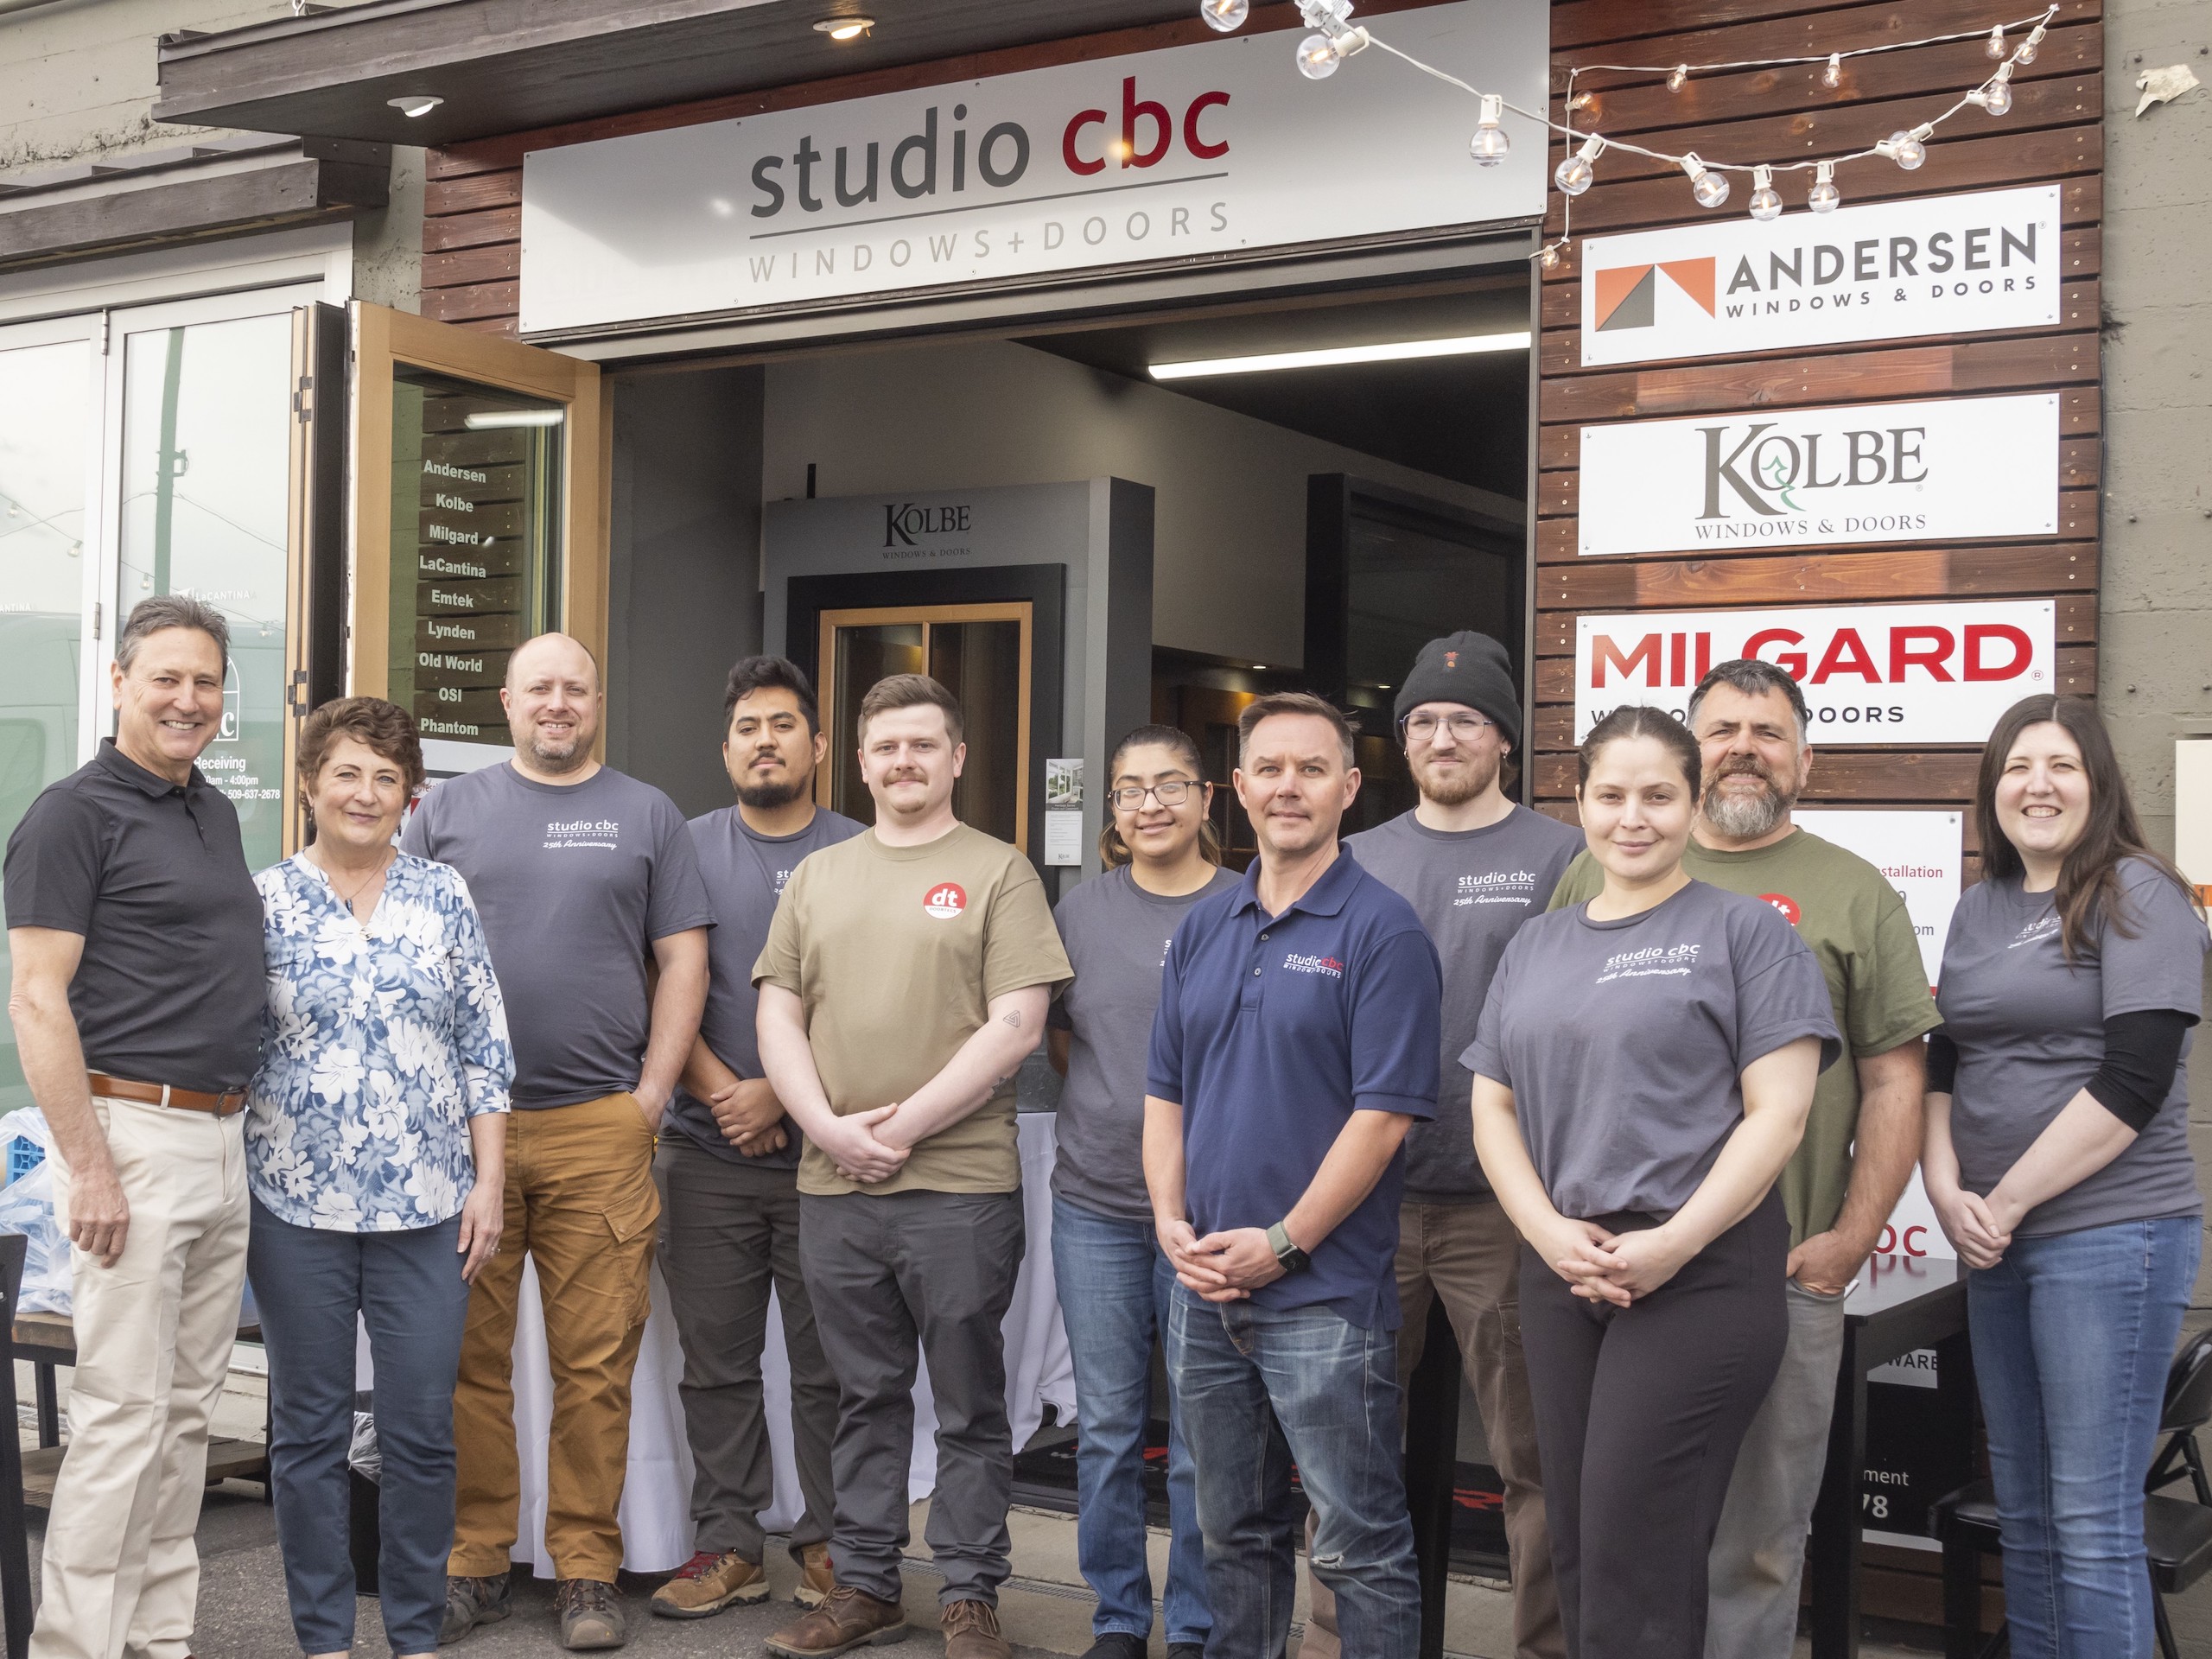 group shot of studio cbc employees standing in front of their showroom